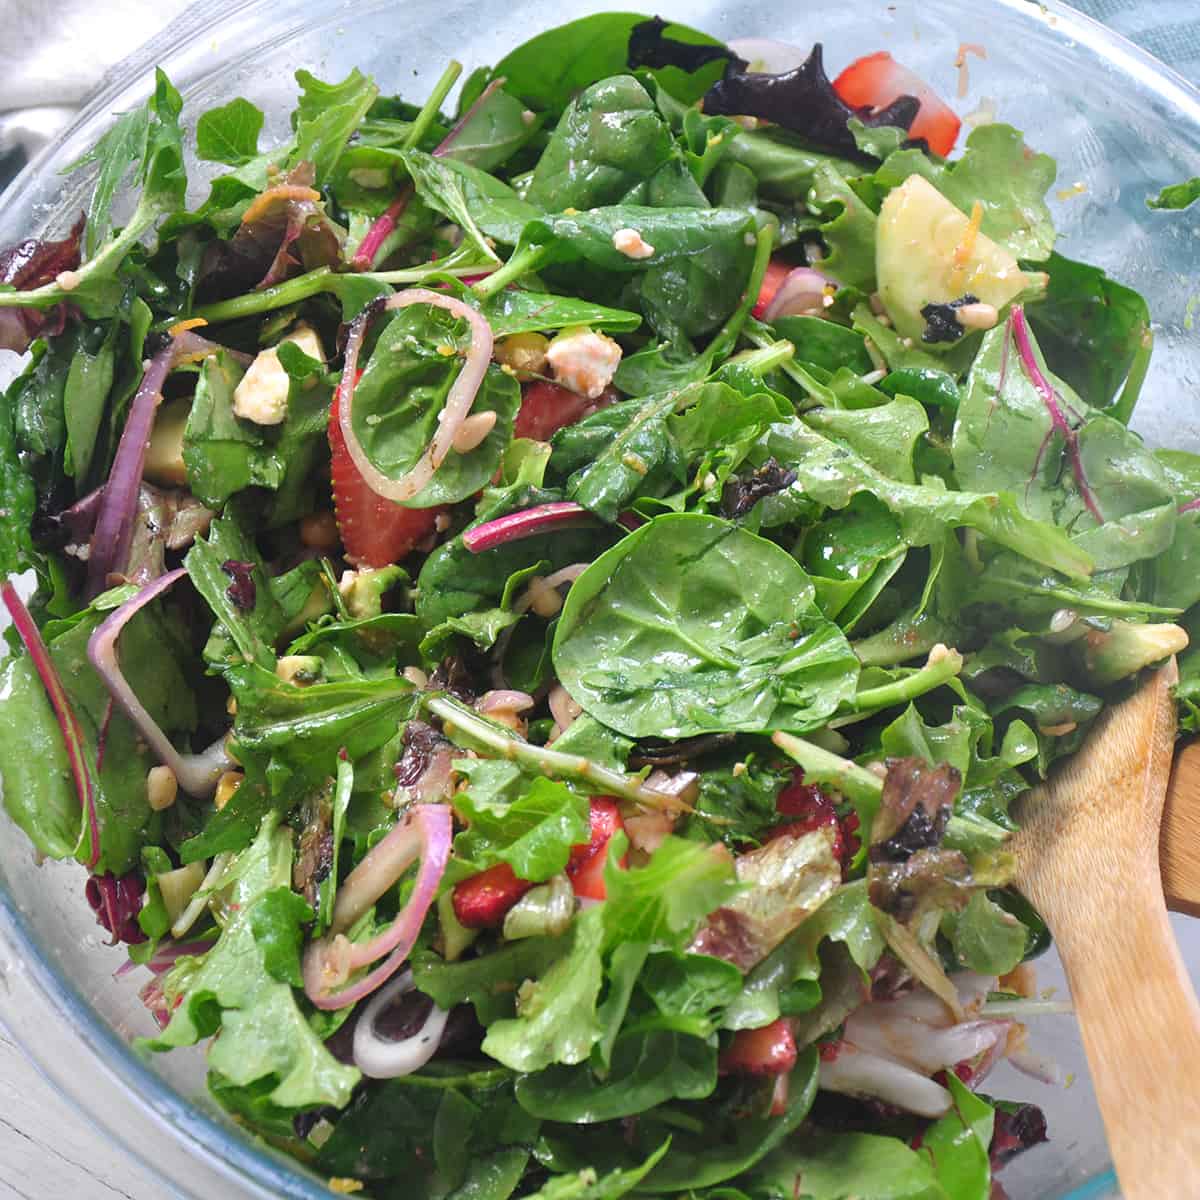 Mixed salad and ingredients in a bowl.